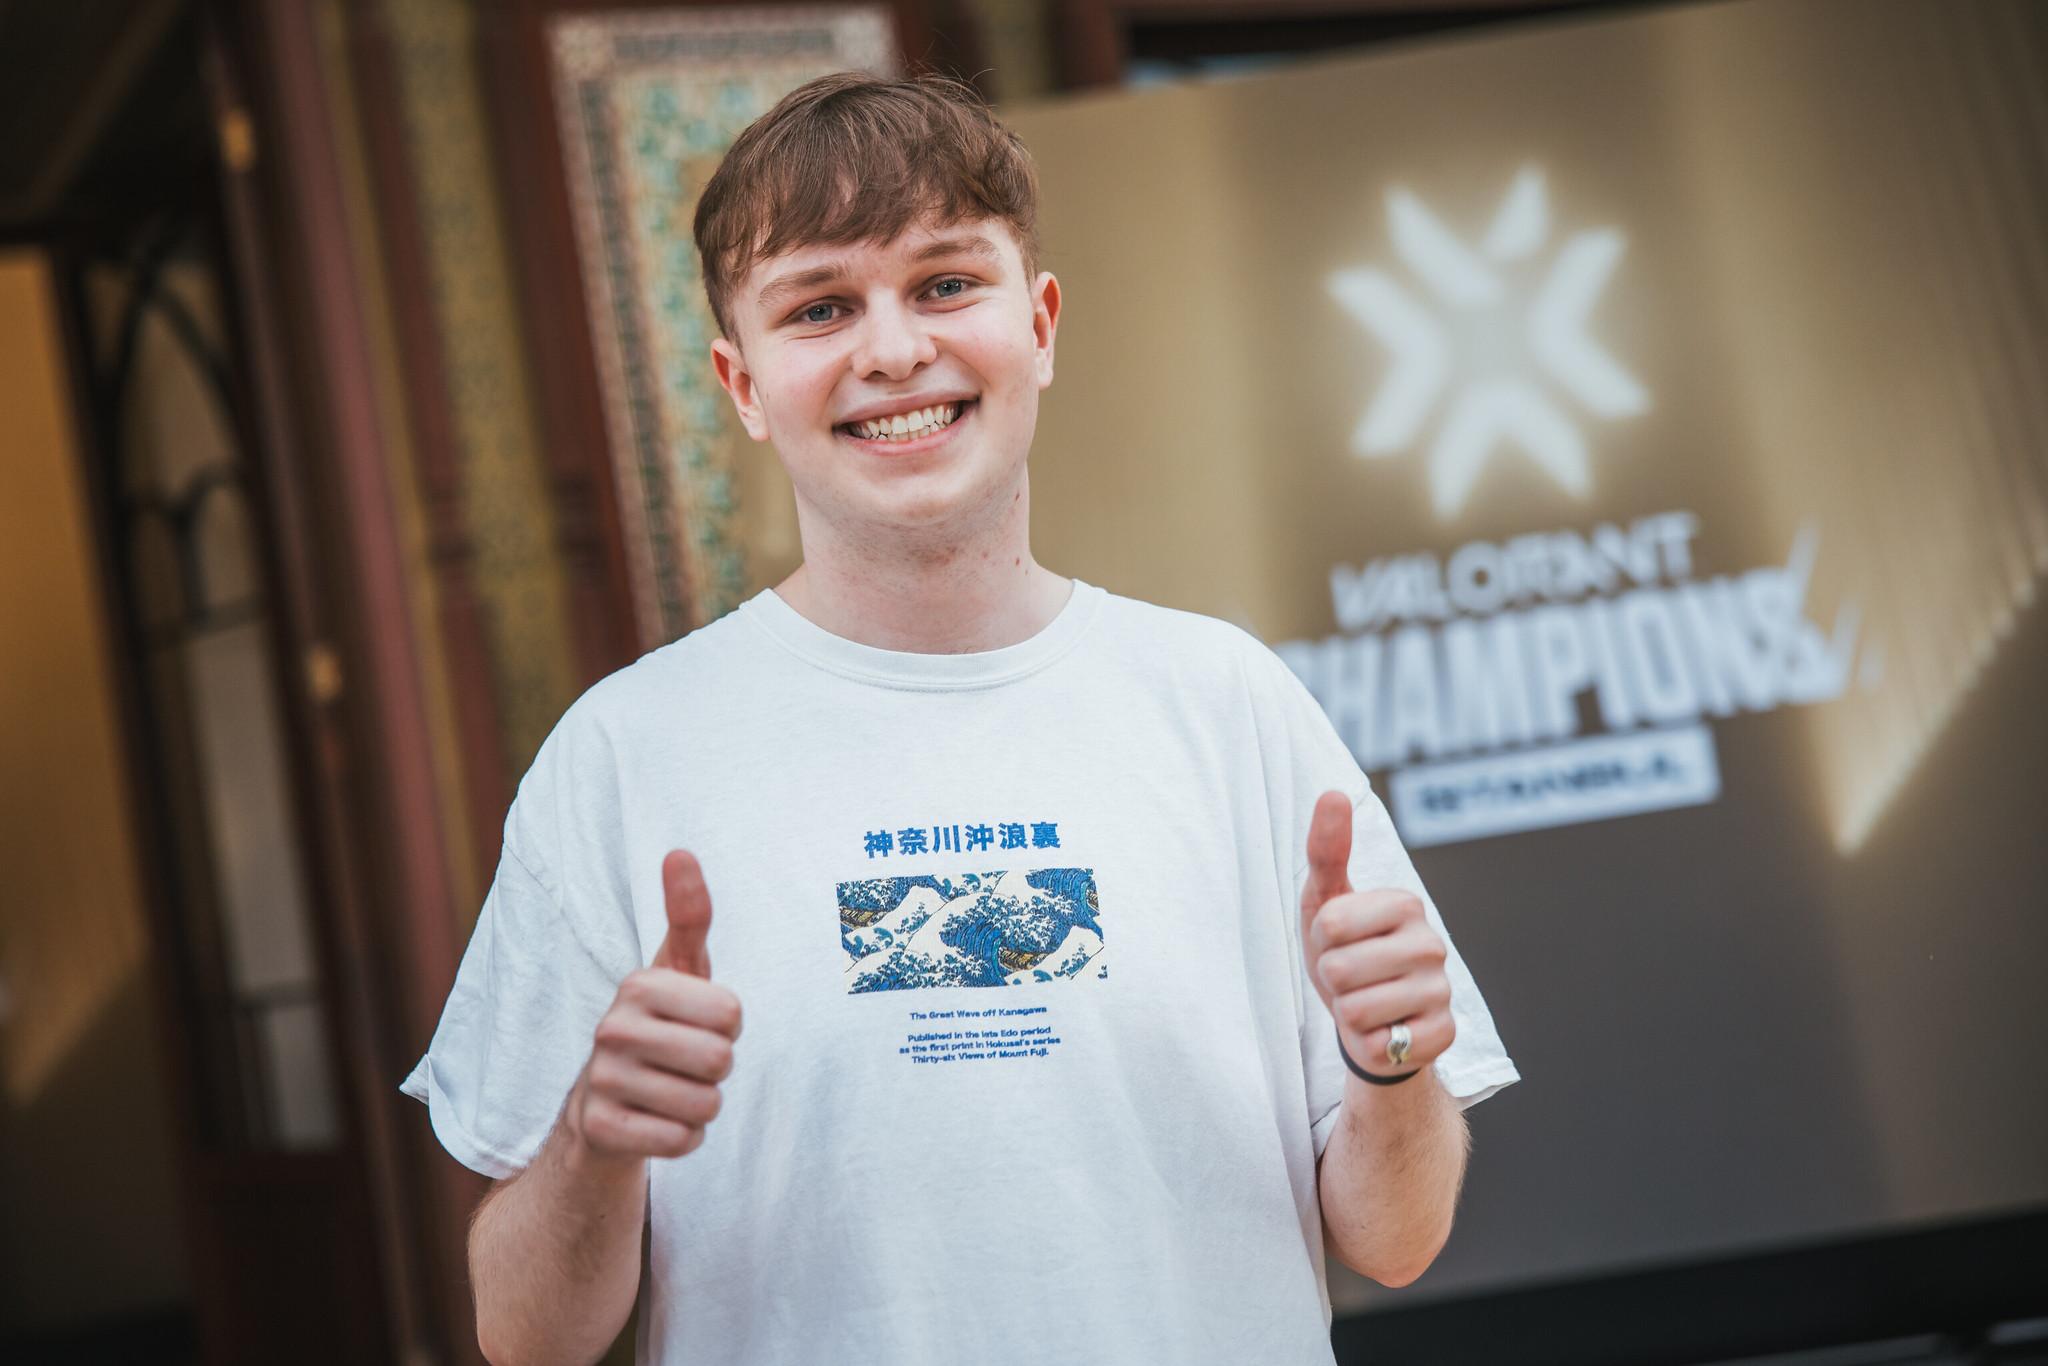 Benjy "Benjyfishy" Fish is seen on the golden carpet at the VALORANT Champions 2022 Istanbul Grand Finals on September 18, 2022 in Istanbul, Turkey.